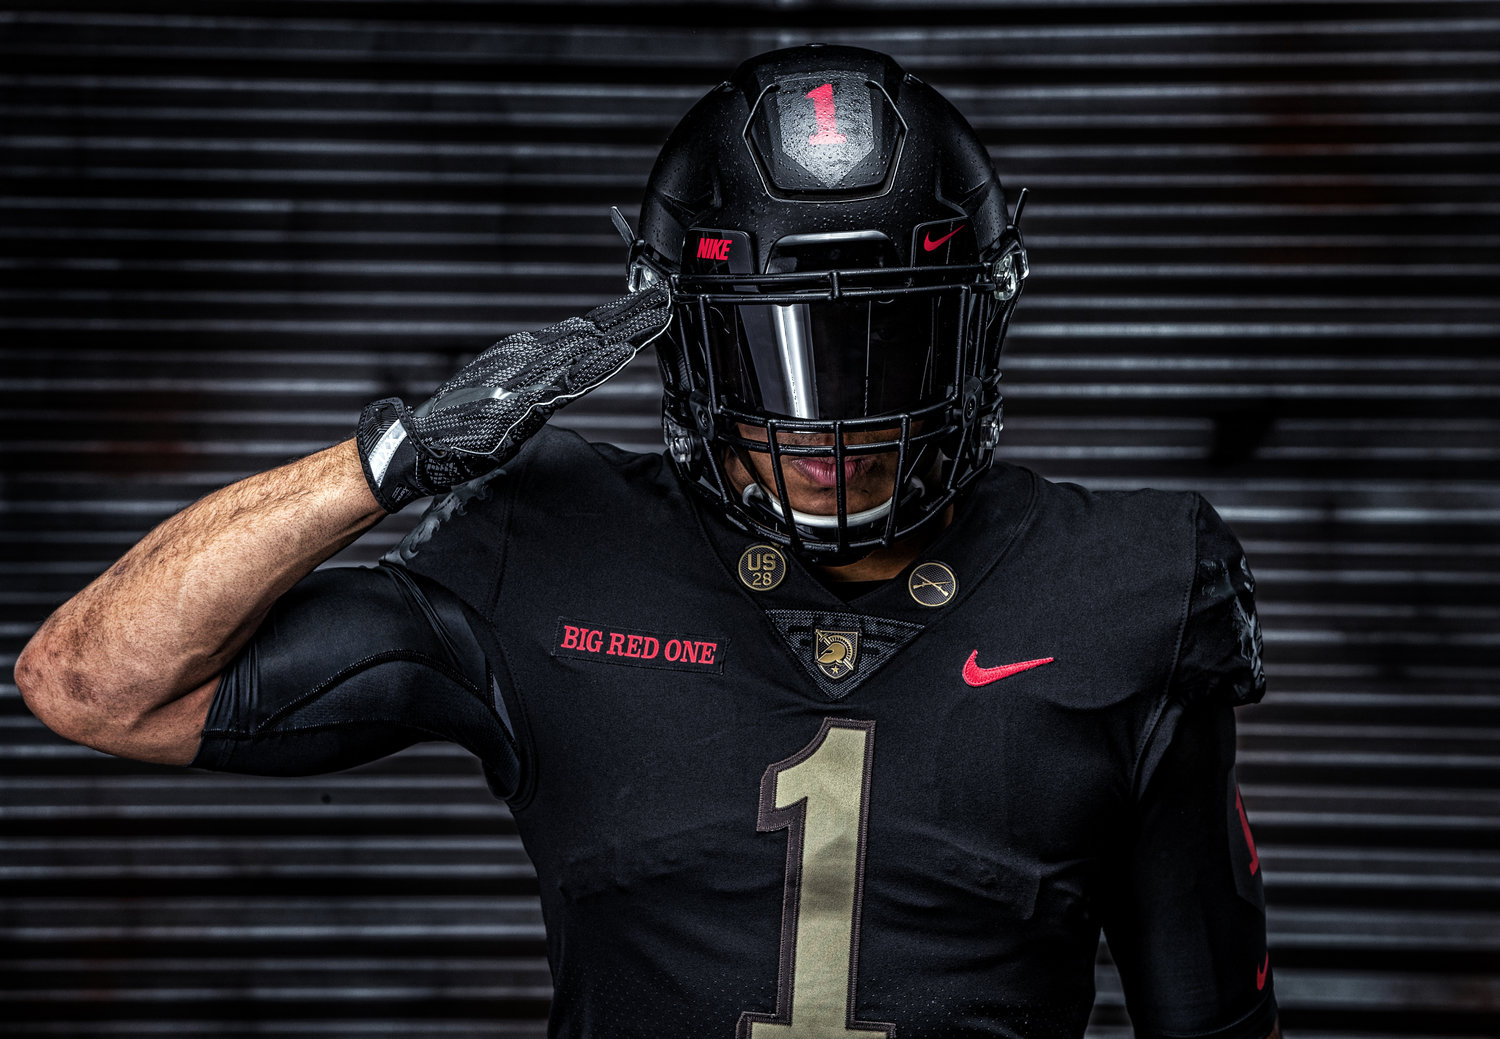 VIDEO West Point football uniform to honor 100yearold 1st Infantry Division in Dec. 8 Army